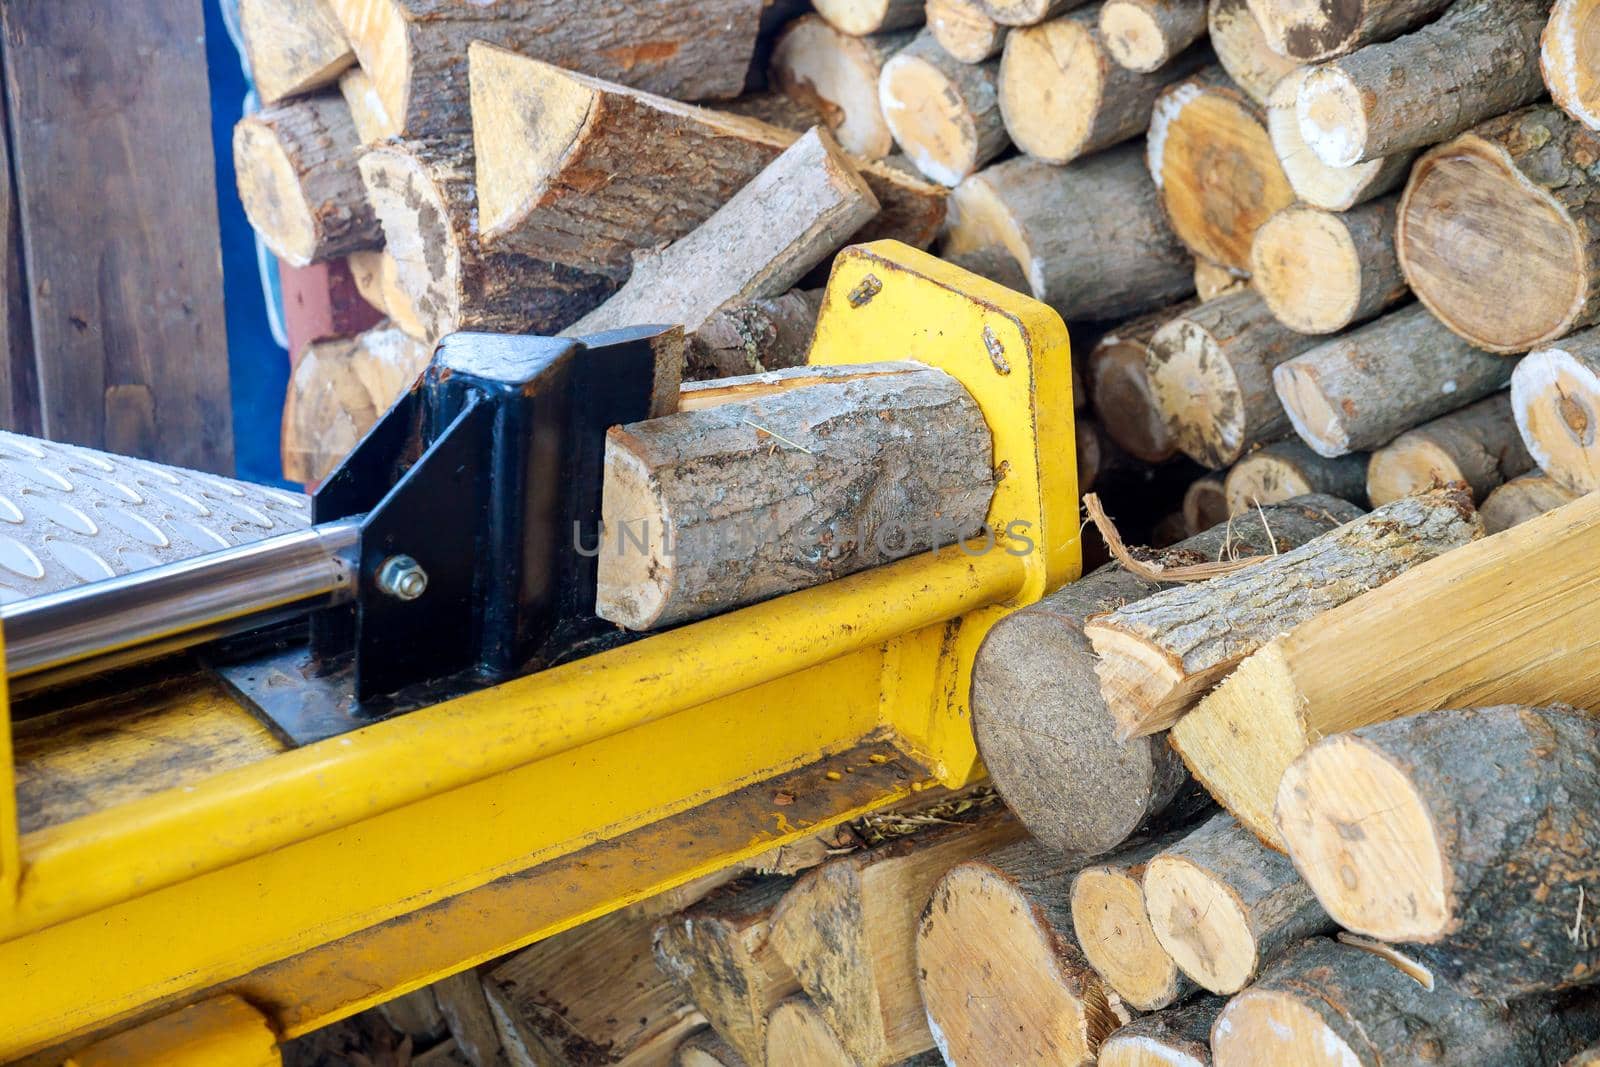 Automated splitter machine equipment by splitting firewood logs by ungvar